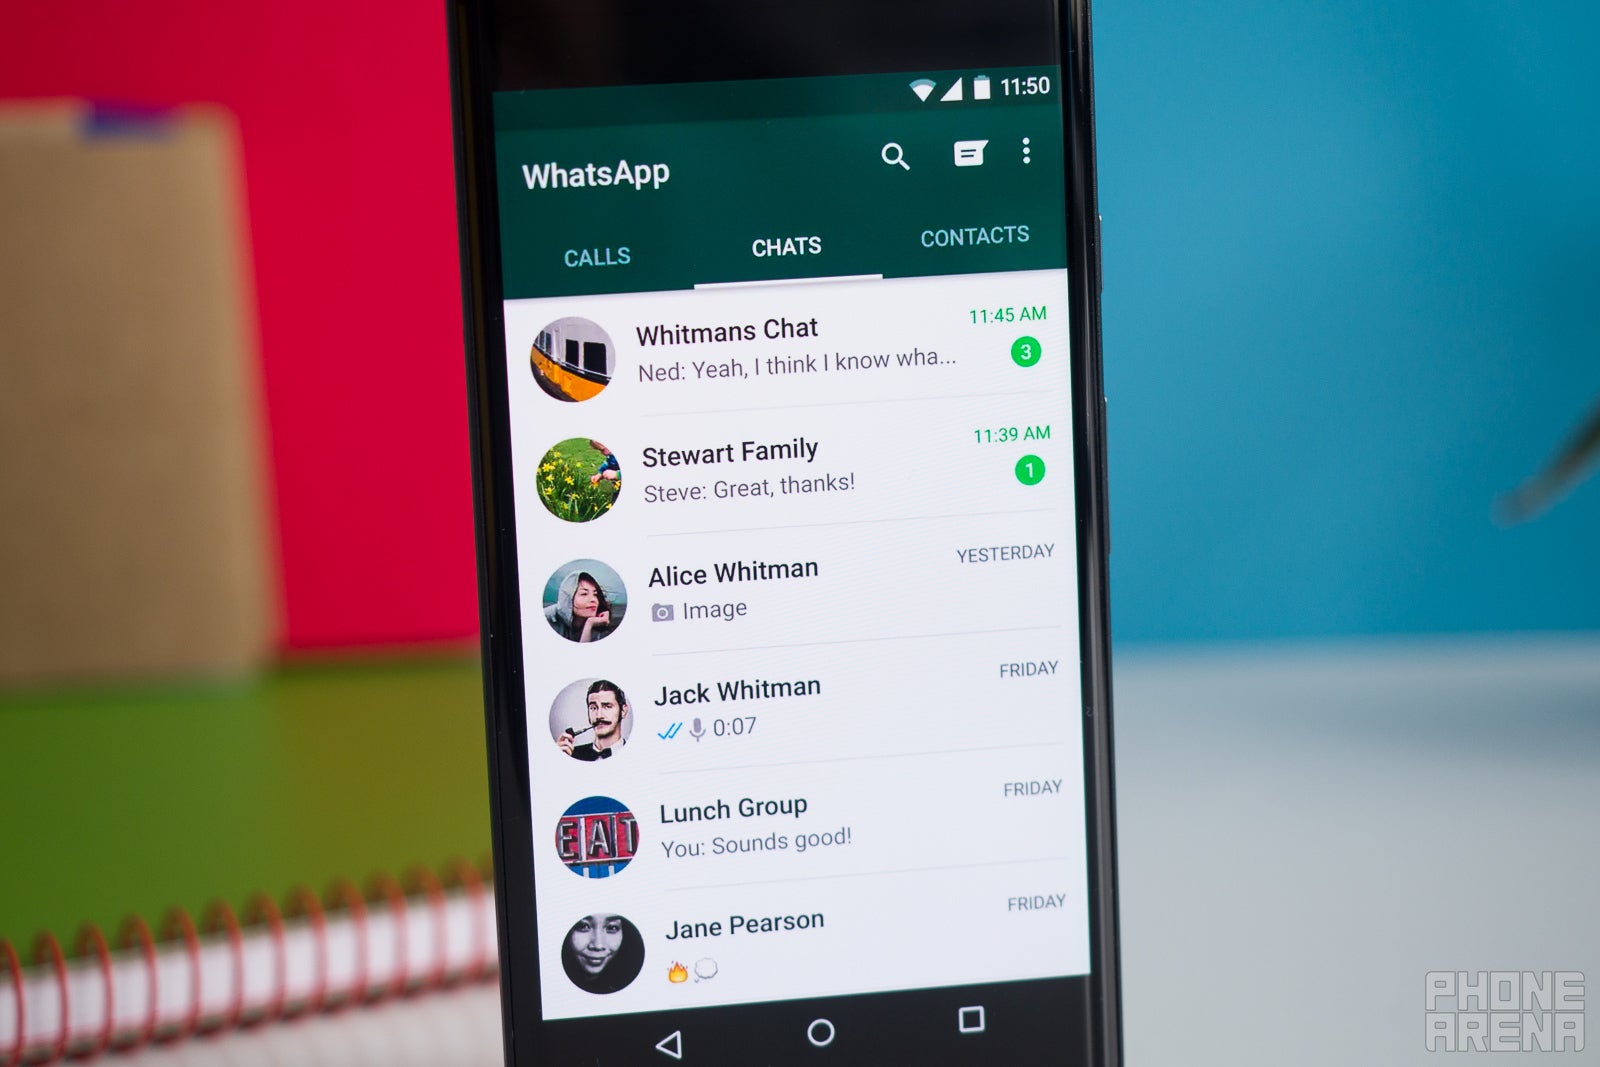 WhatsApp’s new feature Call Links begins rollout